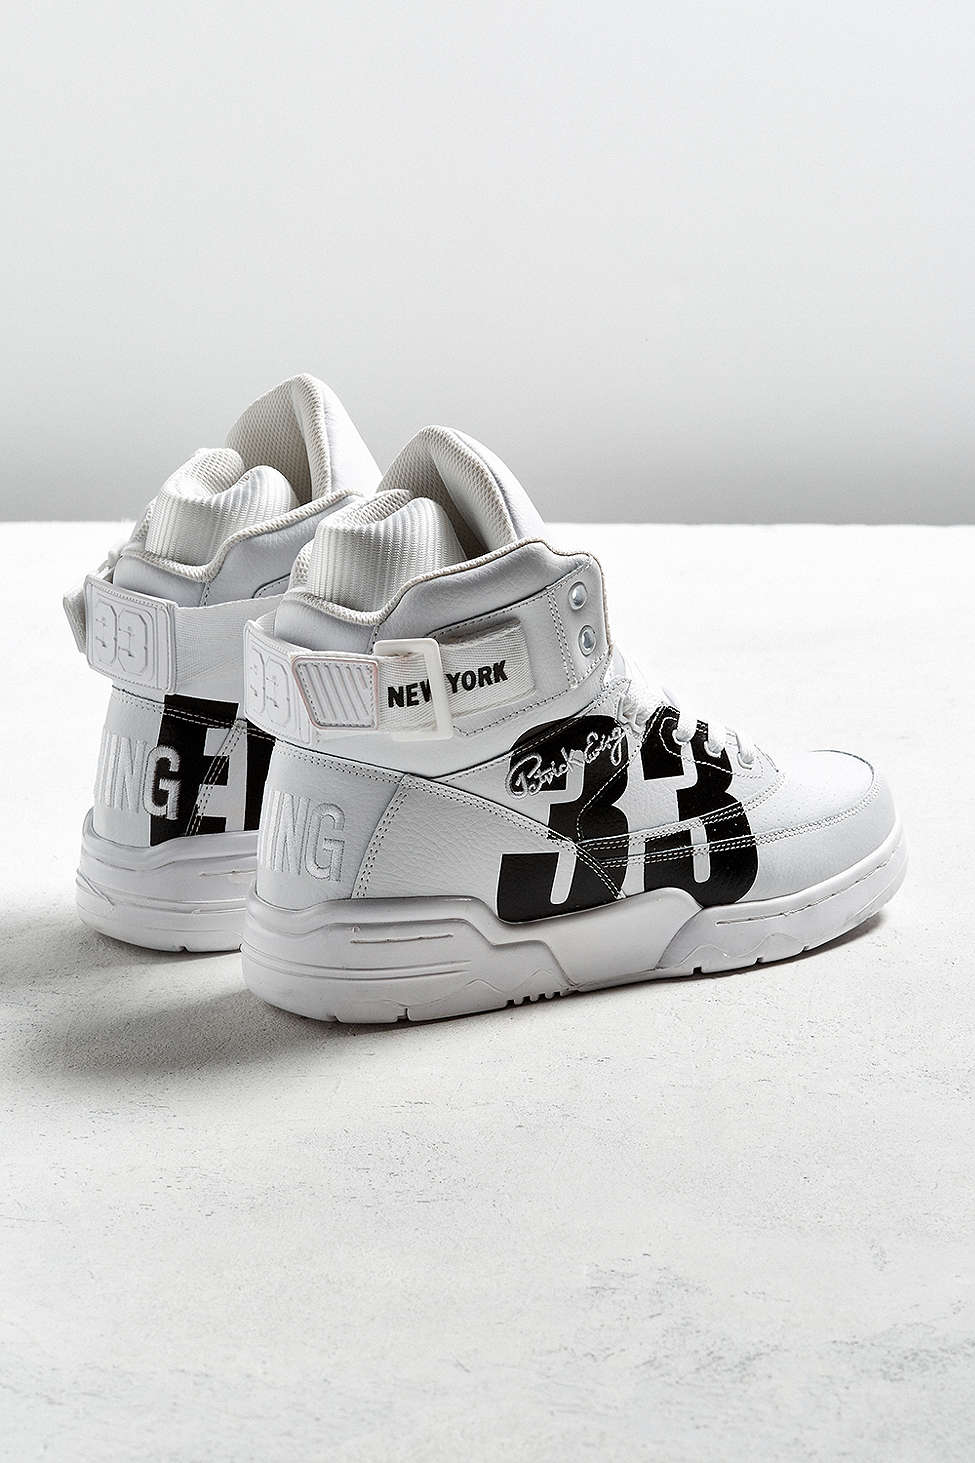 urban outfitters x ewing 33 hi NYC white black 2